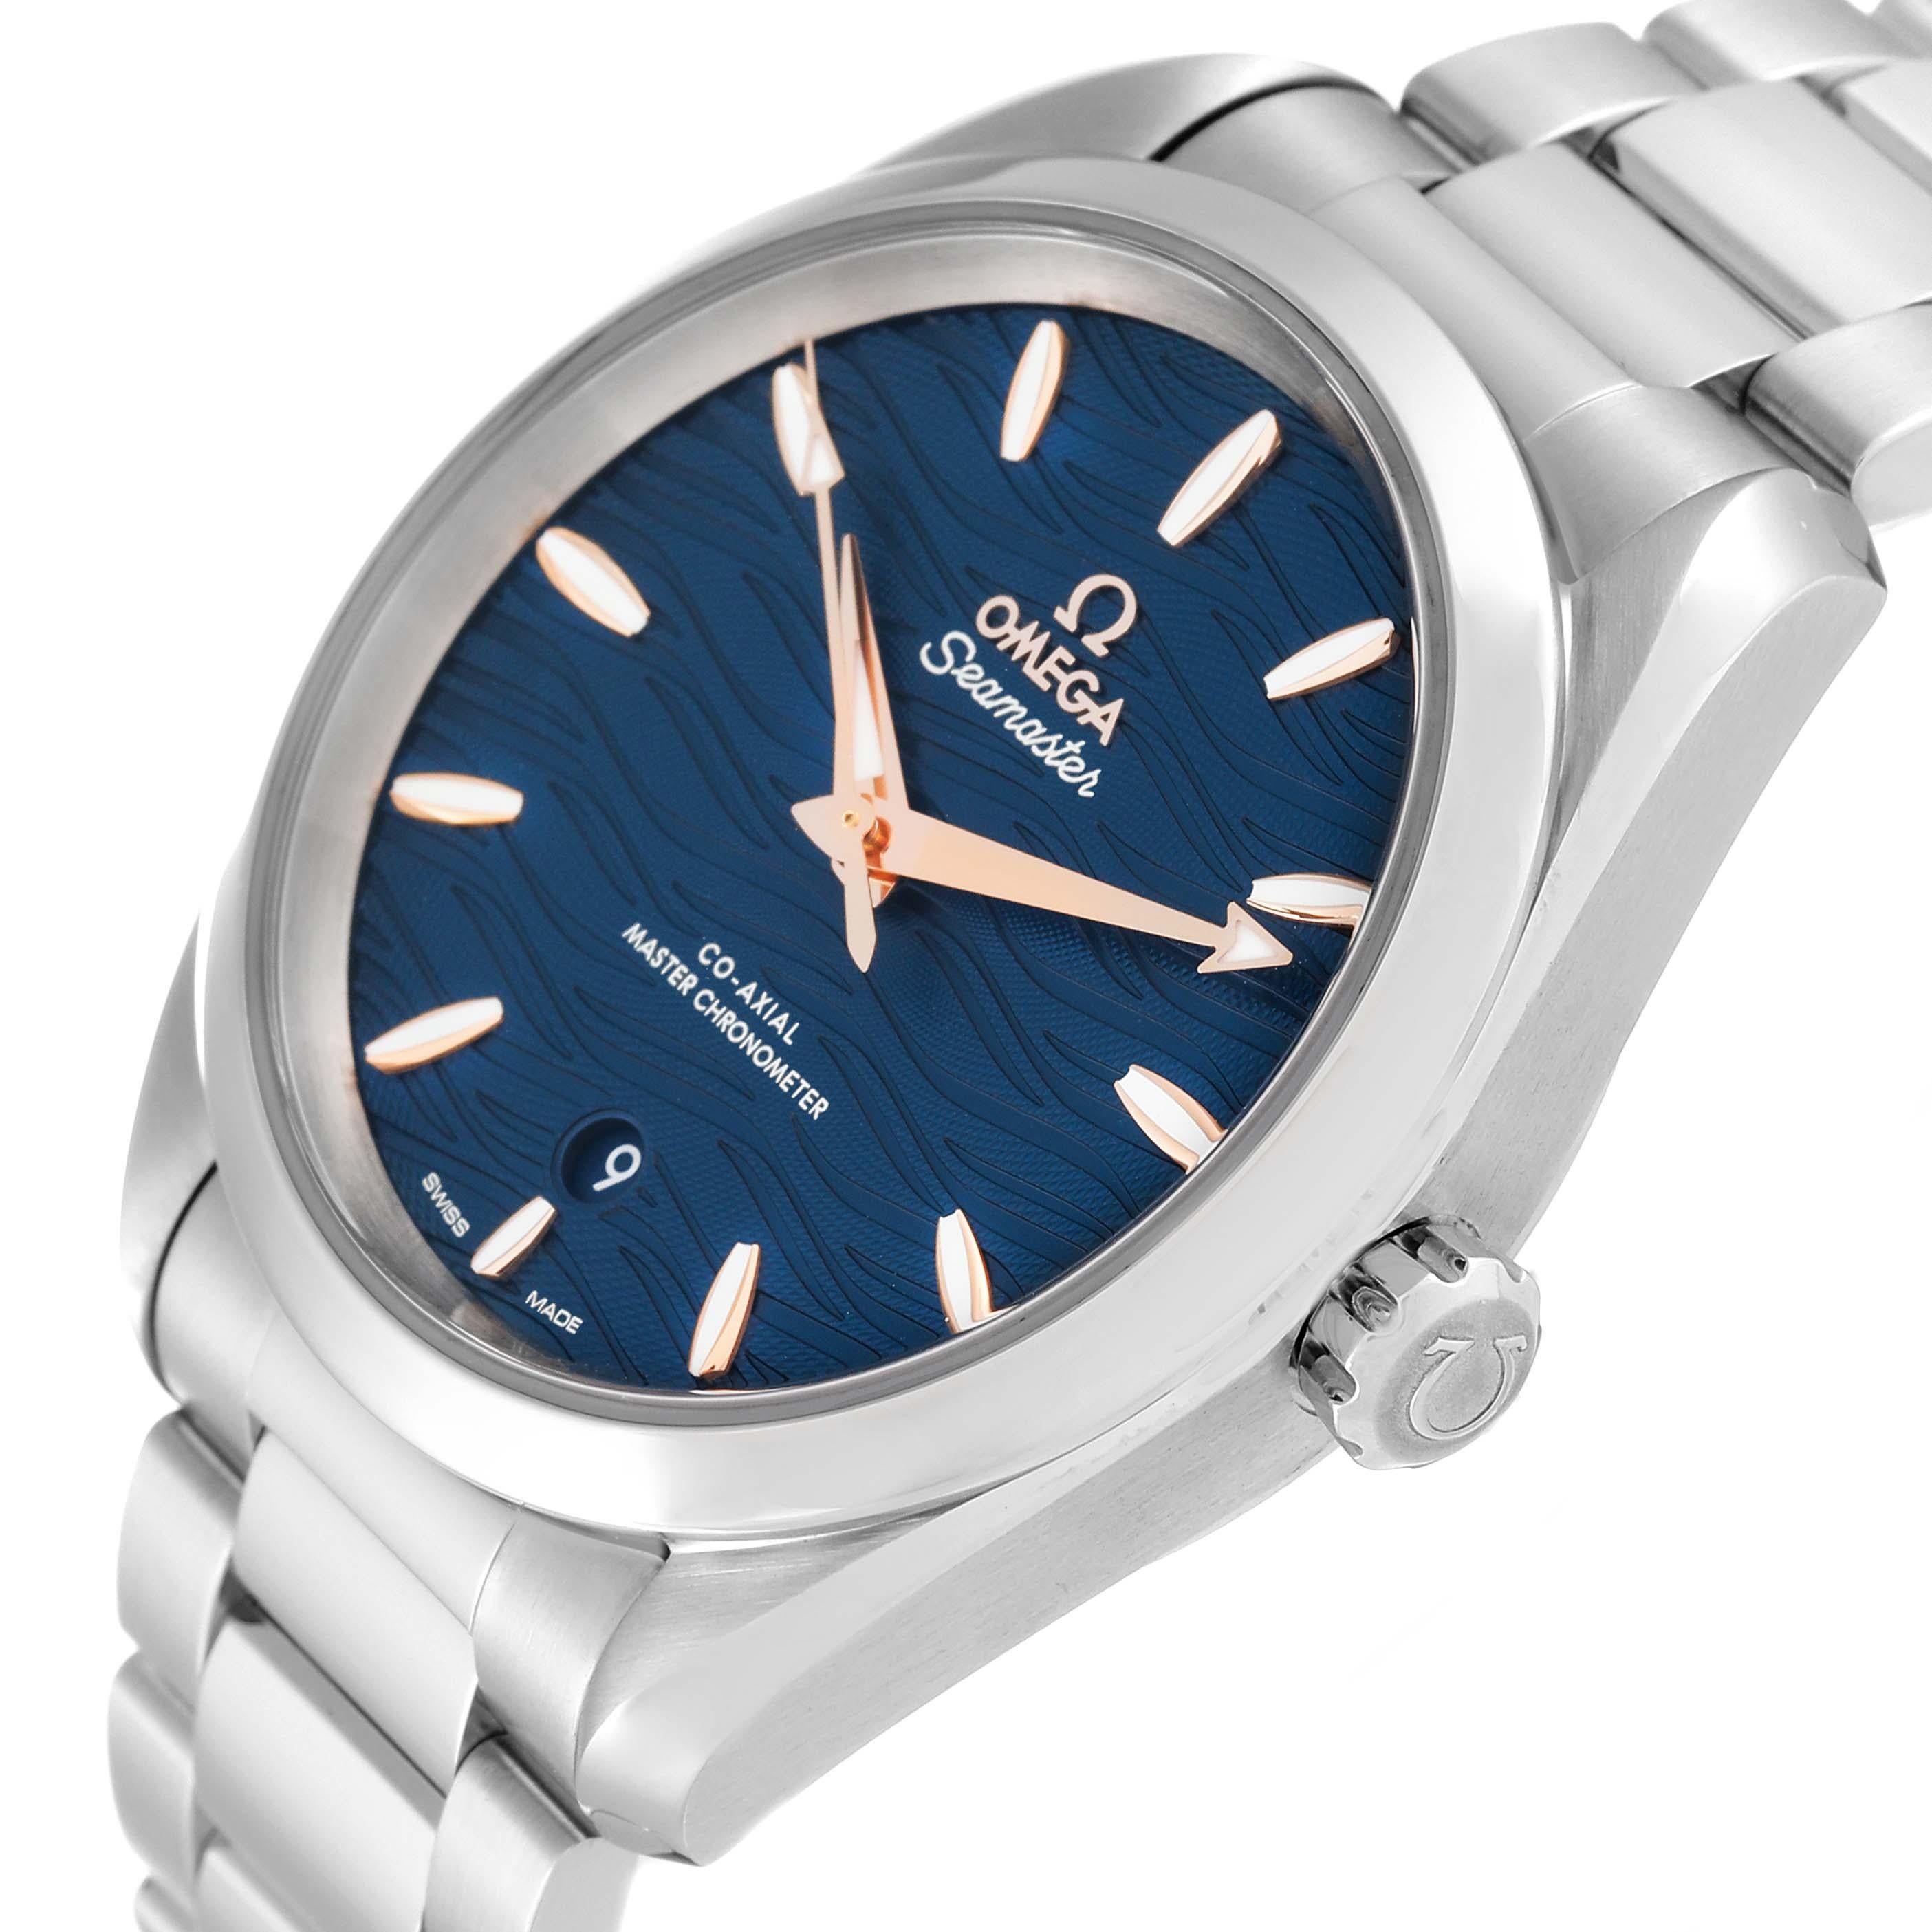 Omega Seamaster Aqua Terra Steel Mens Watch 220.10.38.20.03.002 Box Card. Automatic self-winding movement with Co-Axial Escapement. Stainless steel round case 38.0 mm in diameter. Exhibition transparent sapphire crystal caseback. Stainless steel